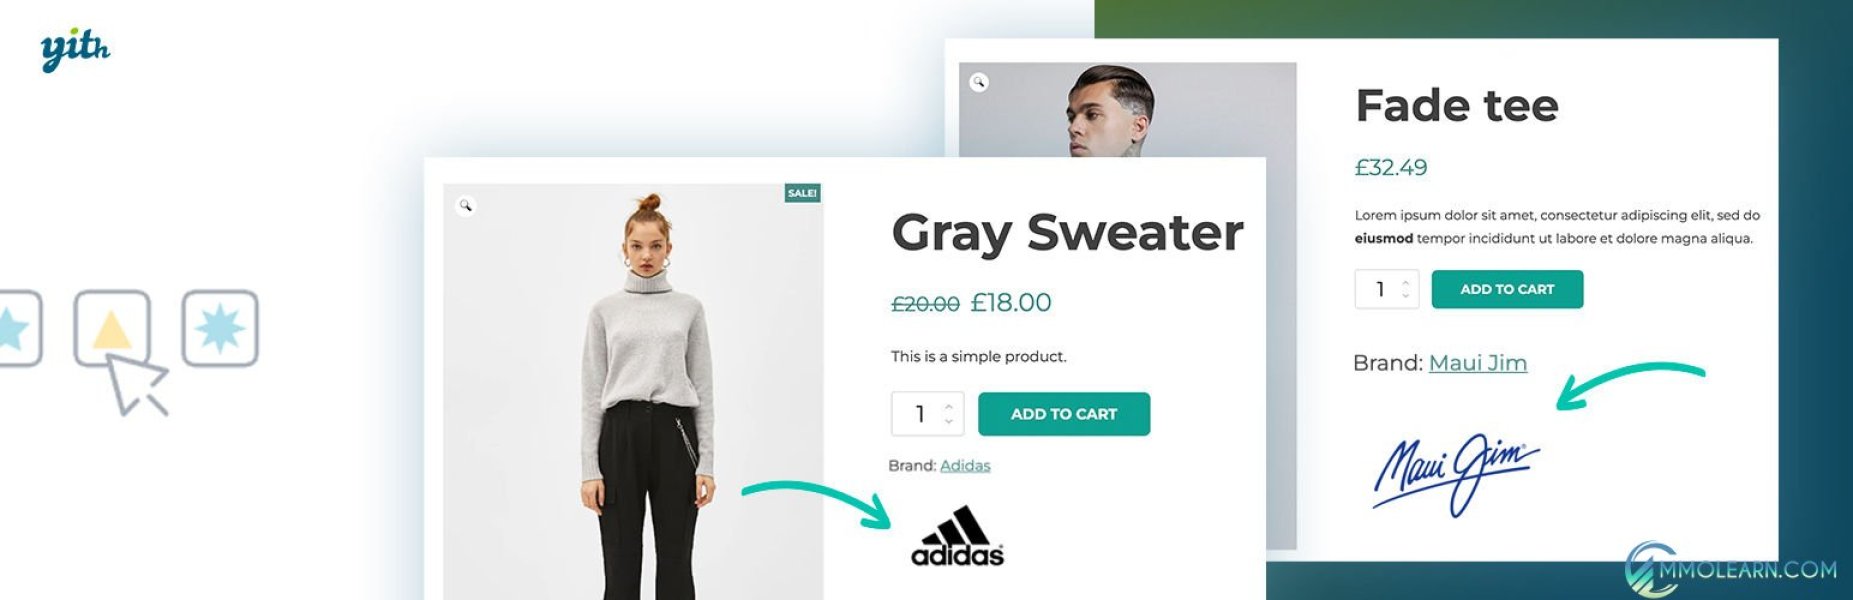 YITH WooCommerce Brands Add-On